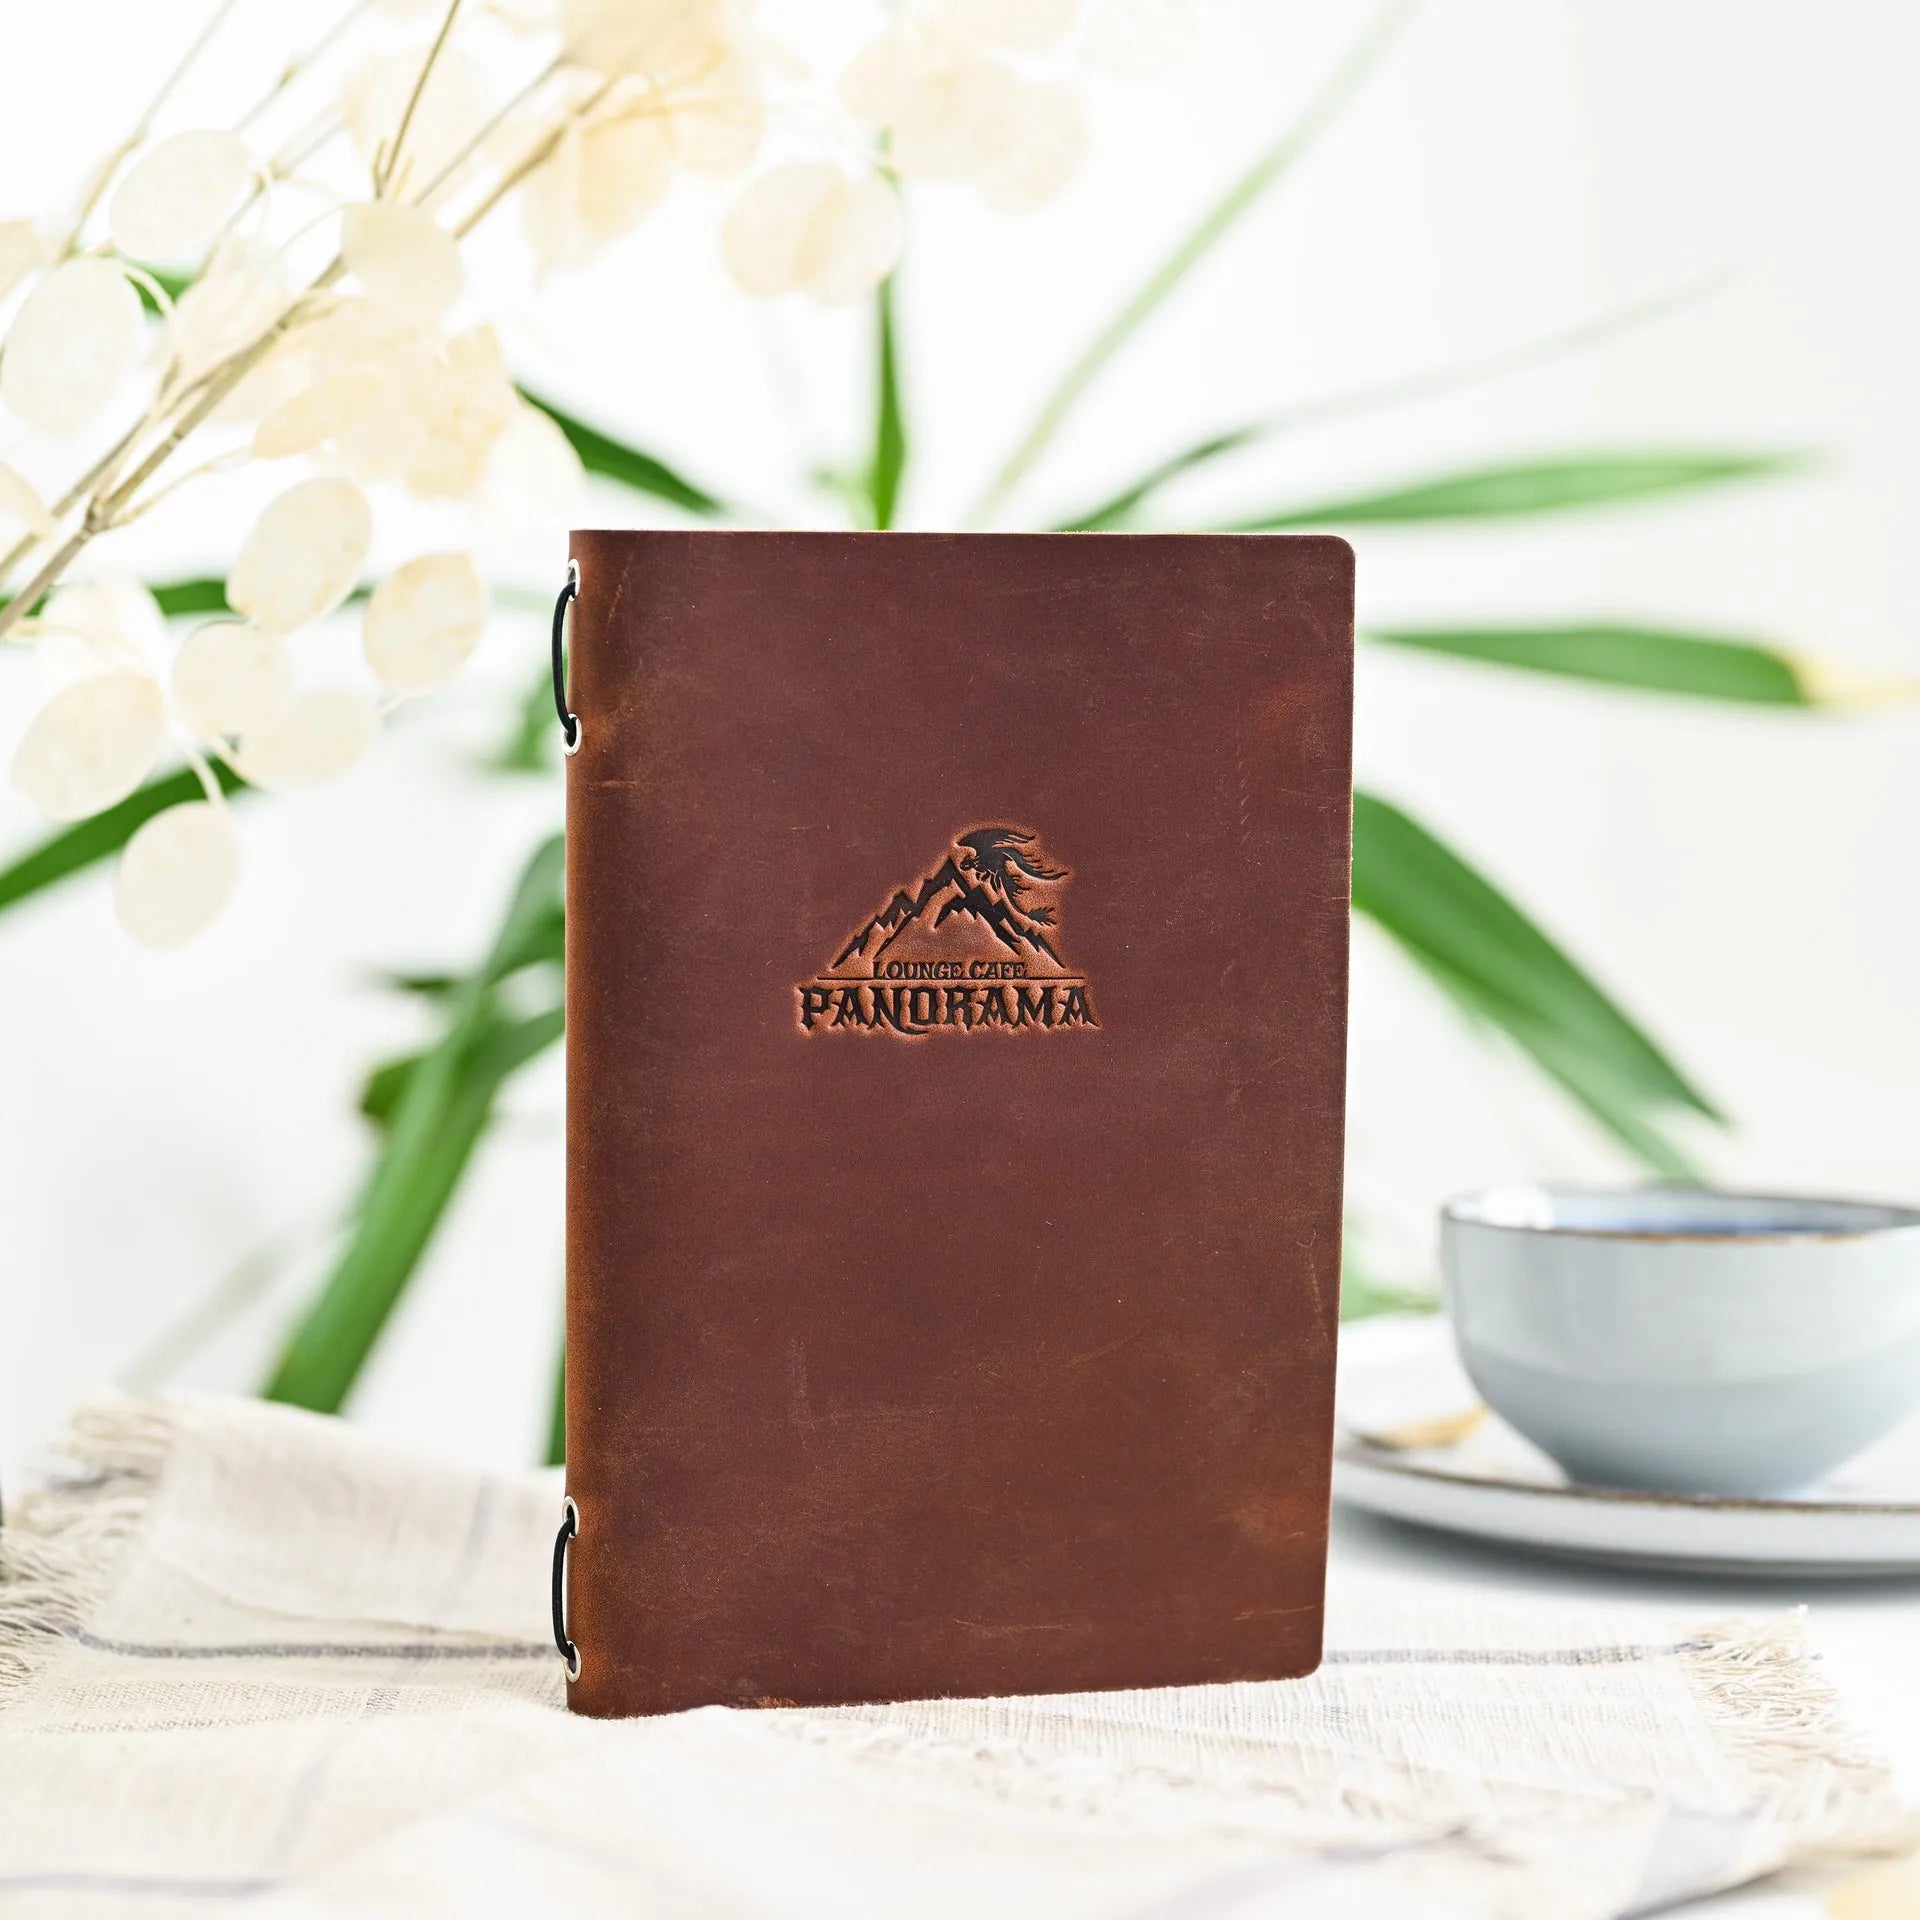 Enhance your menu presentation with our personalized leather cover, featuring your unique logo.